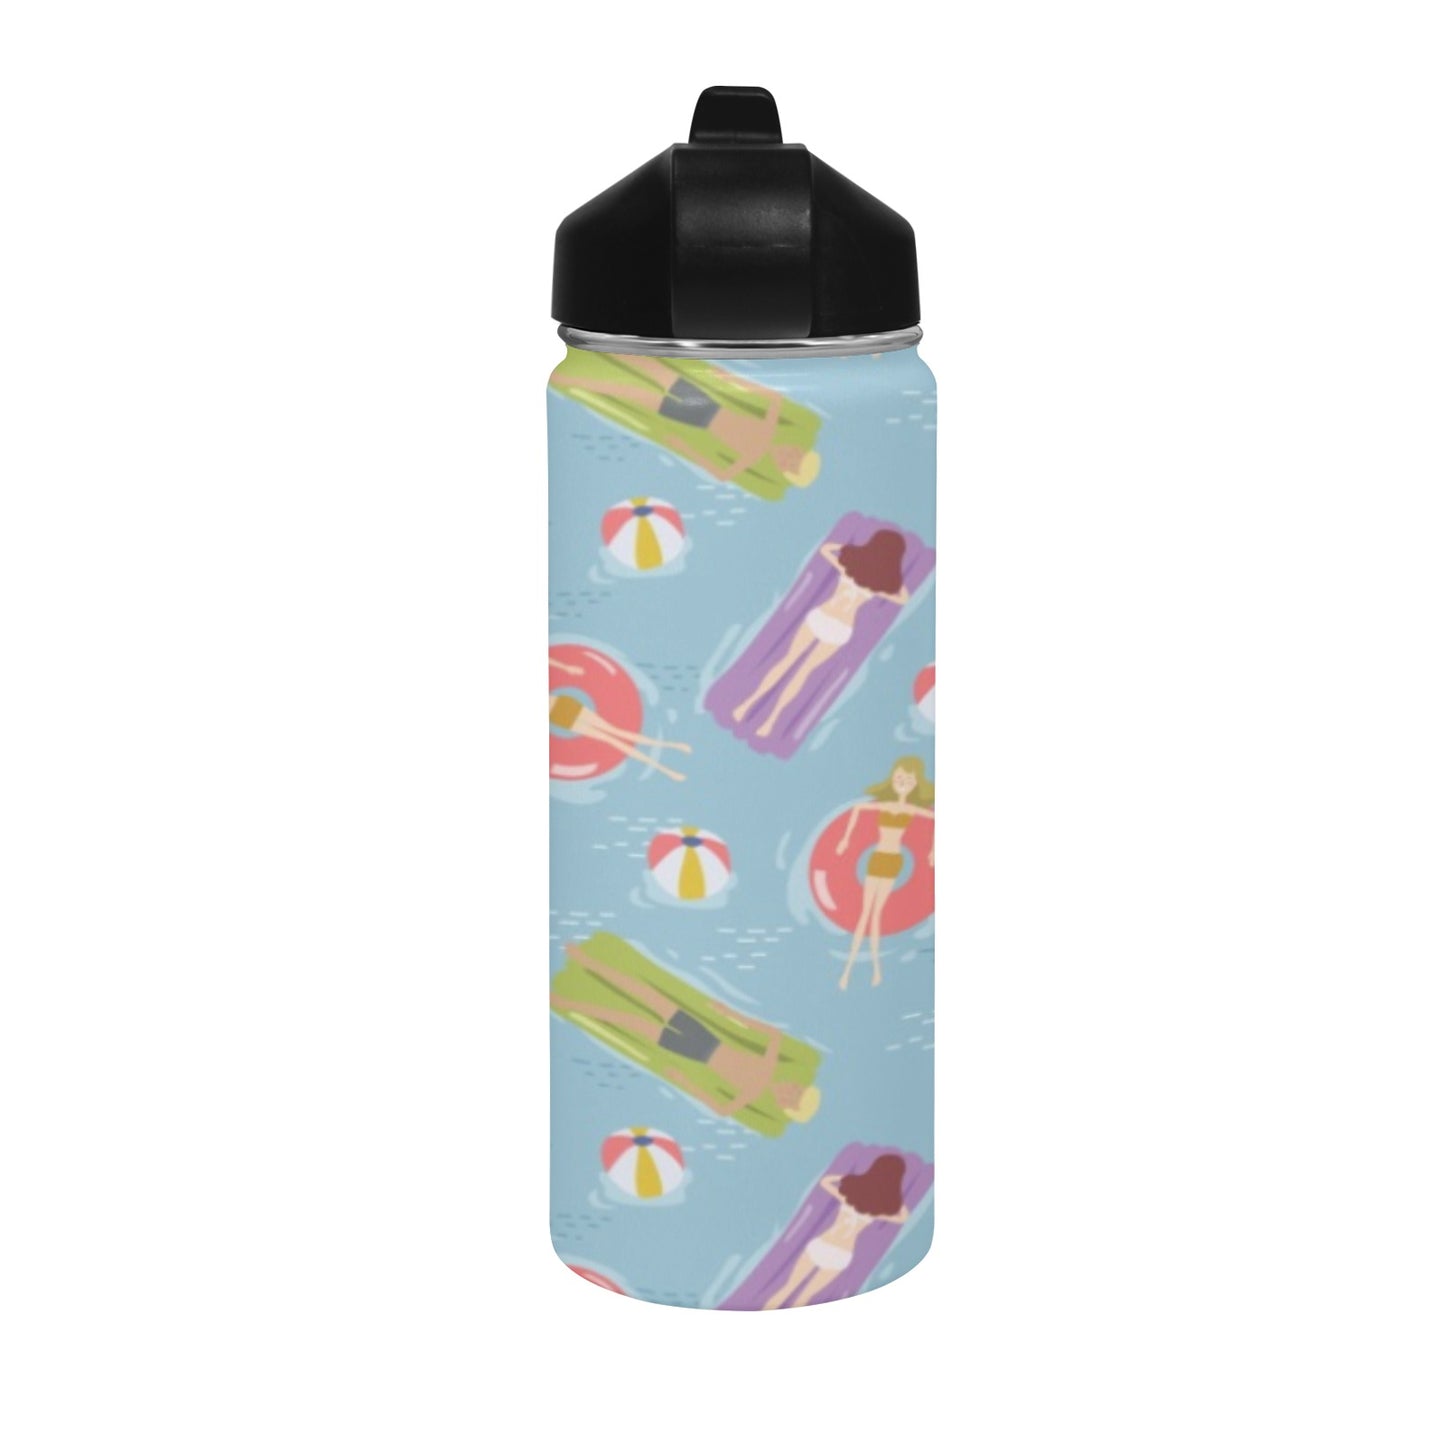 Beach Float - Insulated Water Bottle with Straw Lid (18 oz) Insulated Water Bottle with Straw Lid